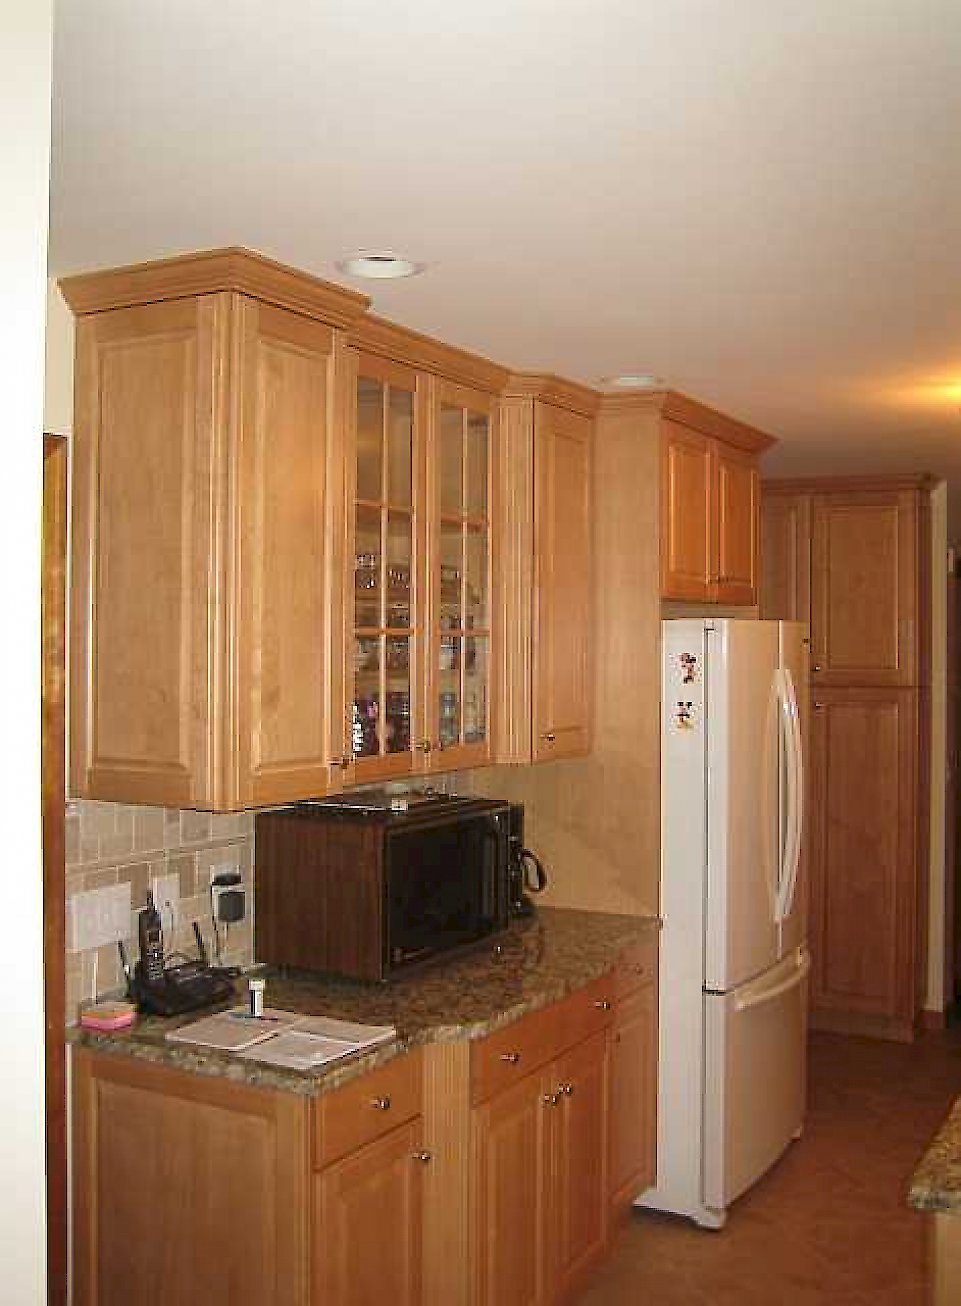 View of the opposite wall in the kitchen.